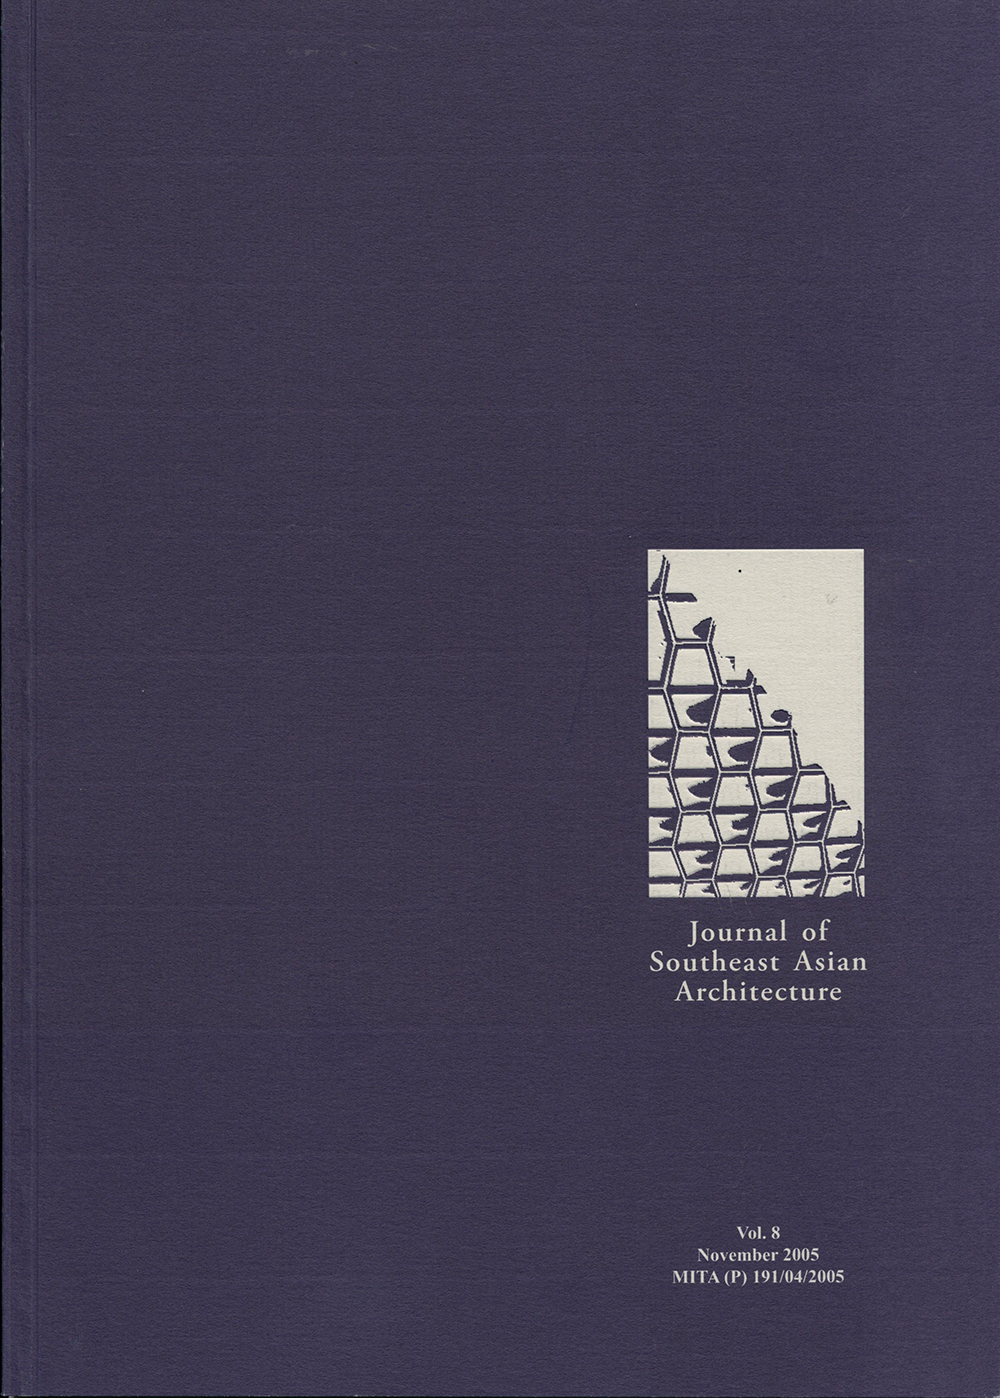 Journal of Southeast Asian Architecture (Volume 8)